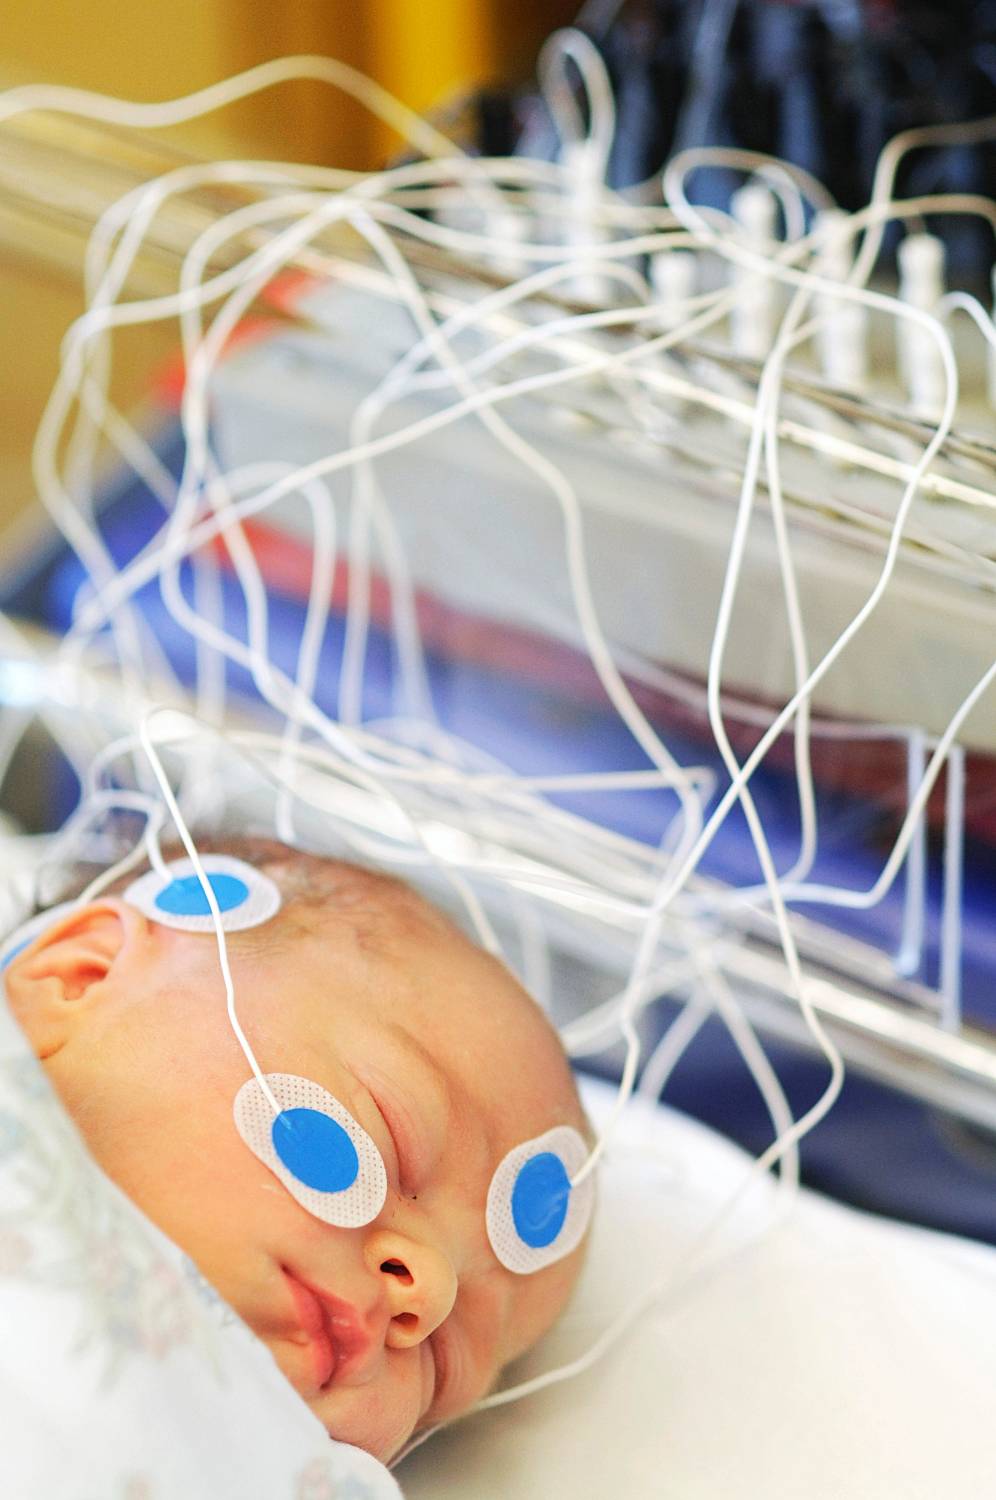 ERP and EEG Measured in infants during sleep The babies brains are far more